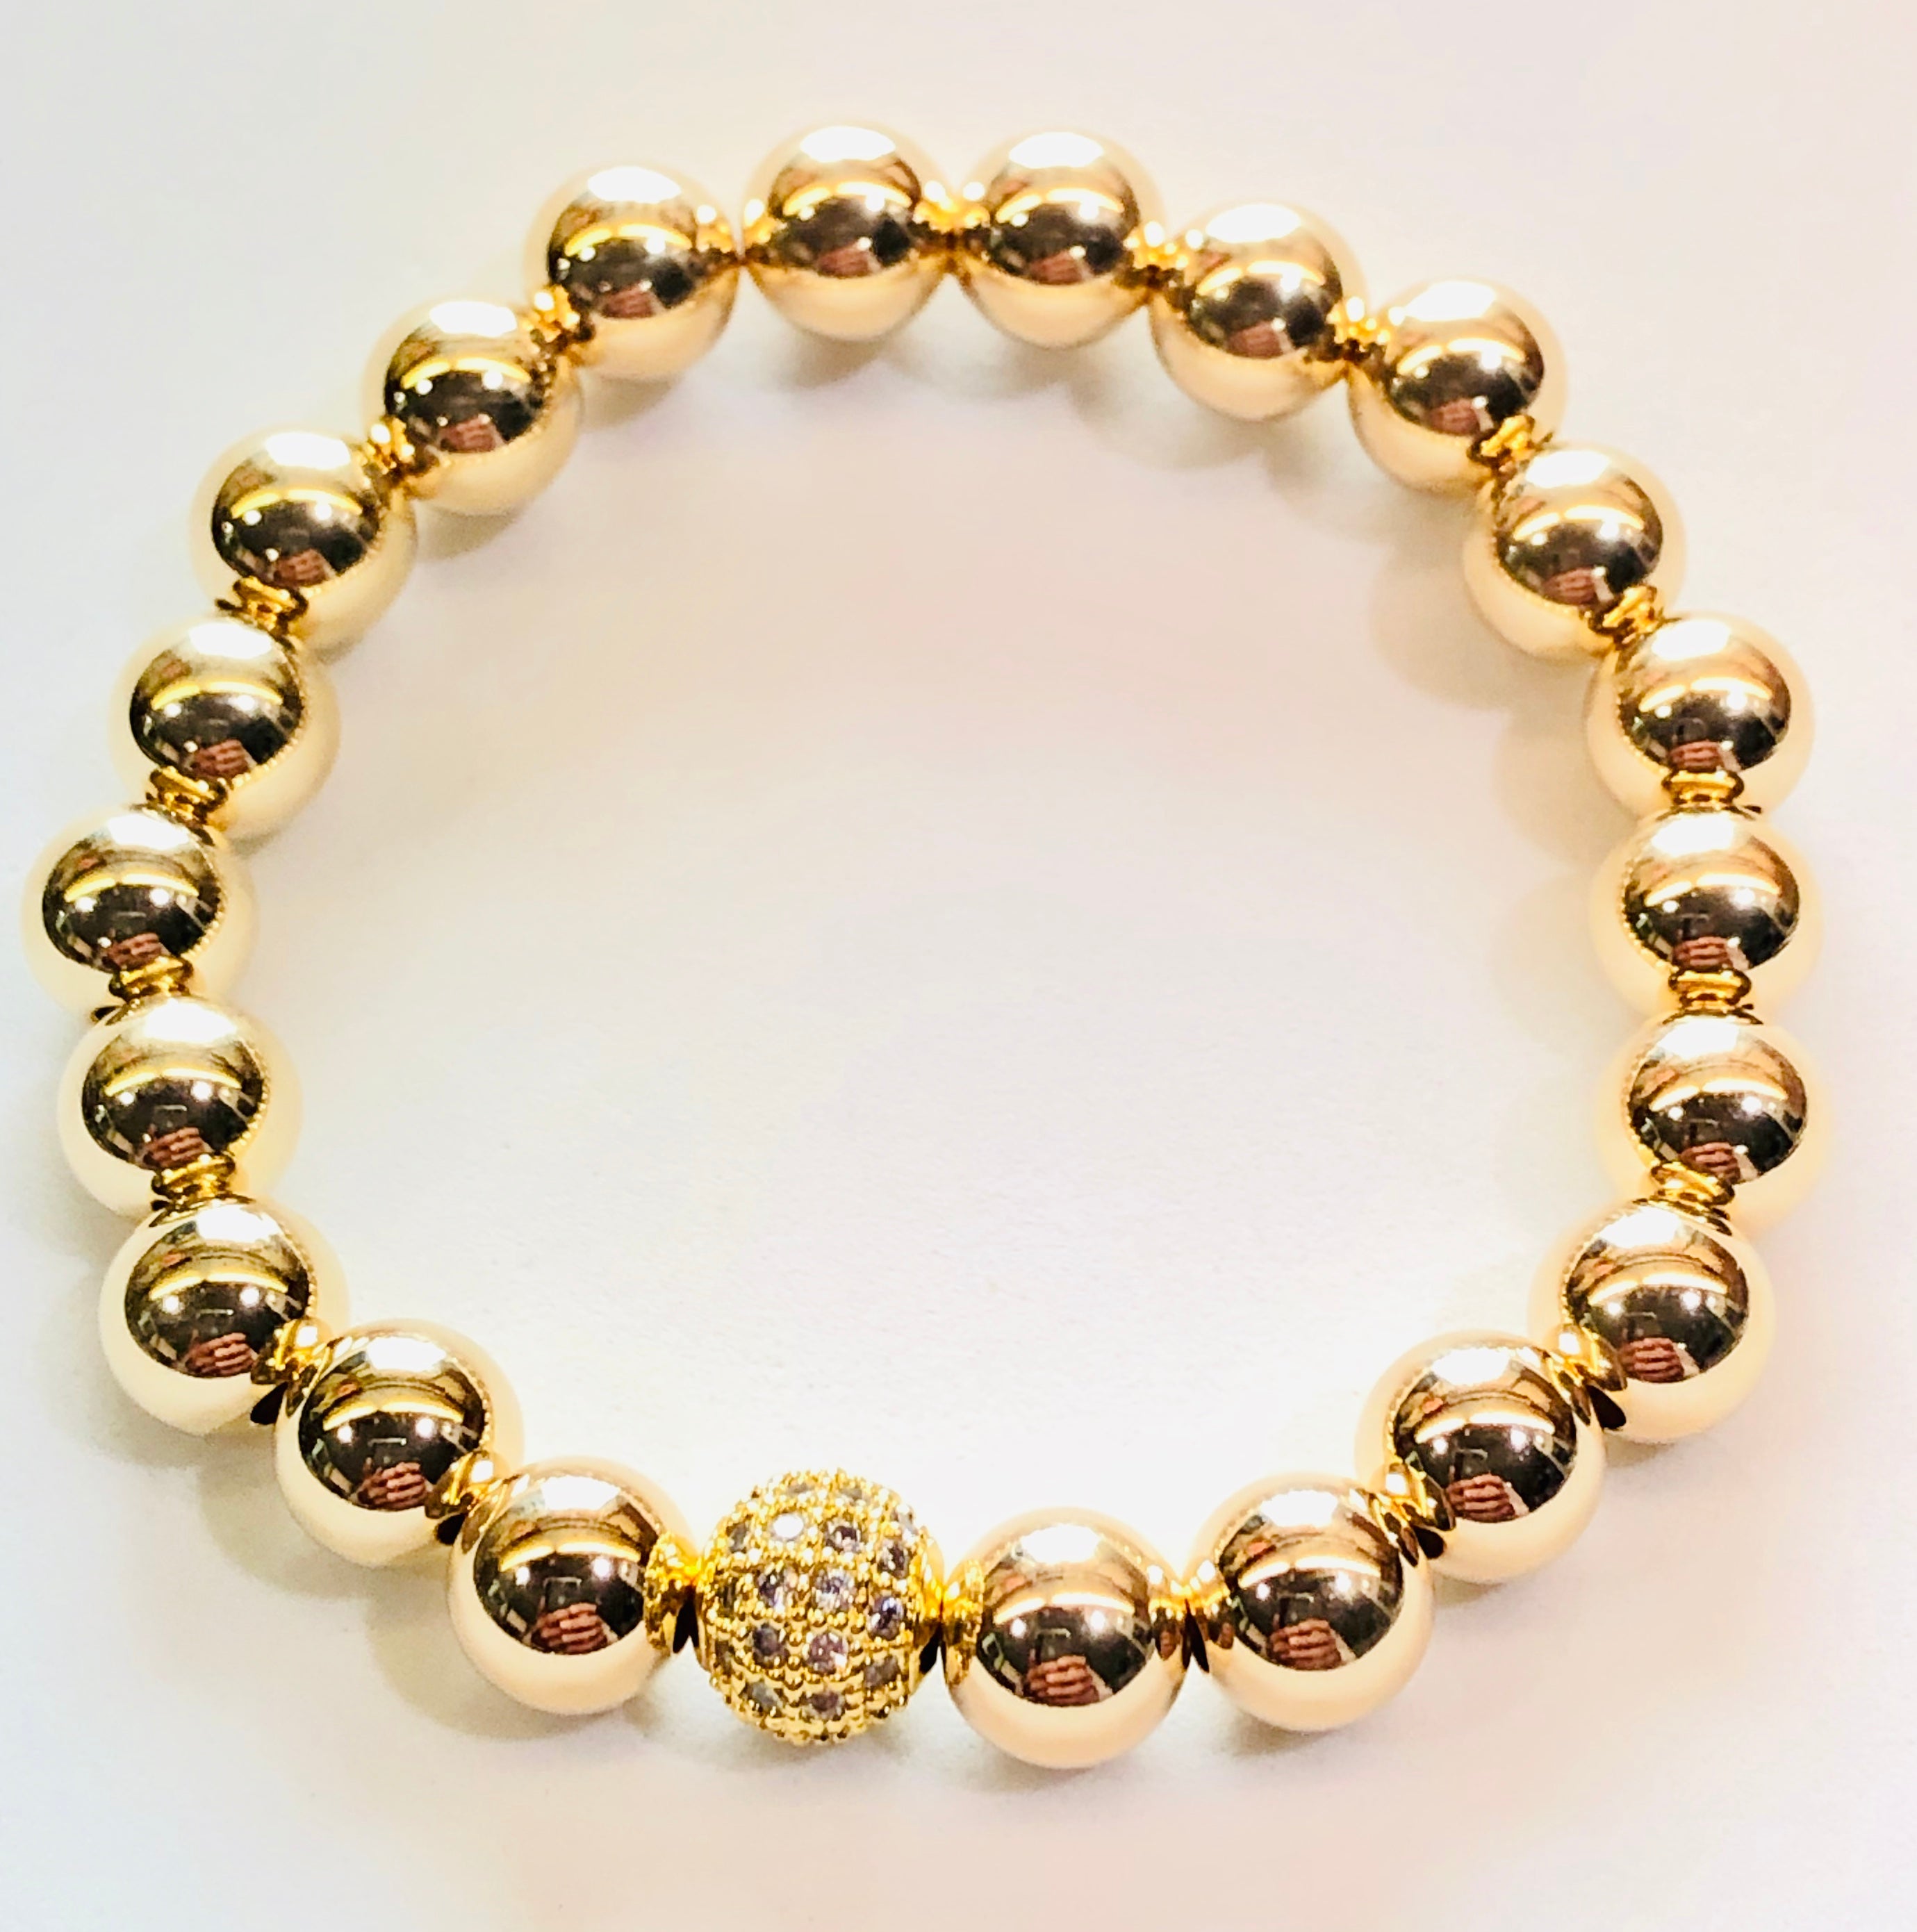 8mm 14kt Gold Filled Bead Bracelet with Jeweled Disco Ball